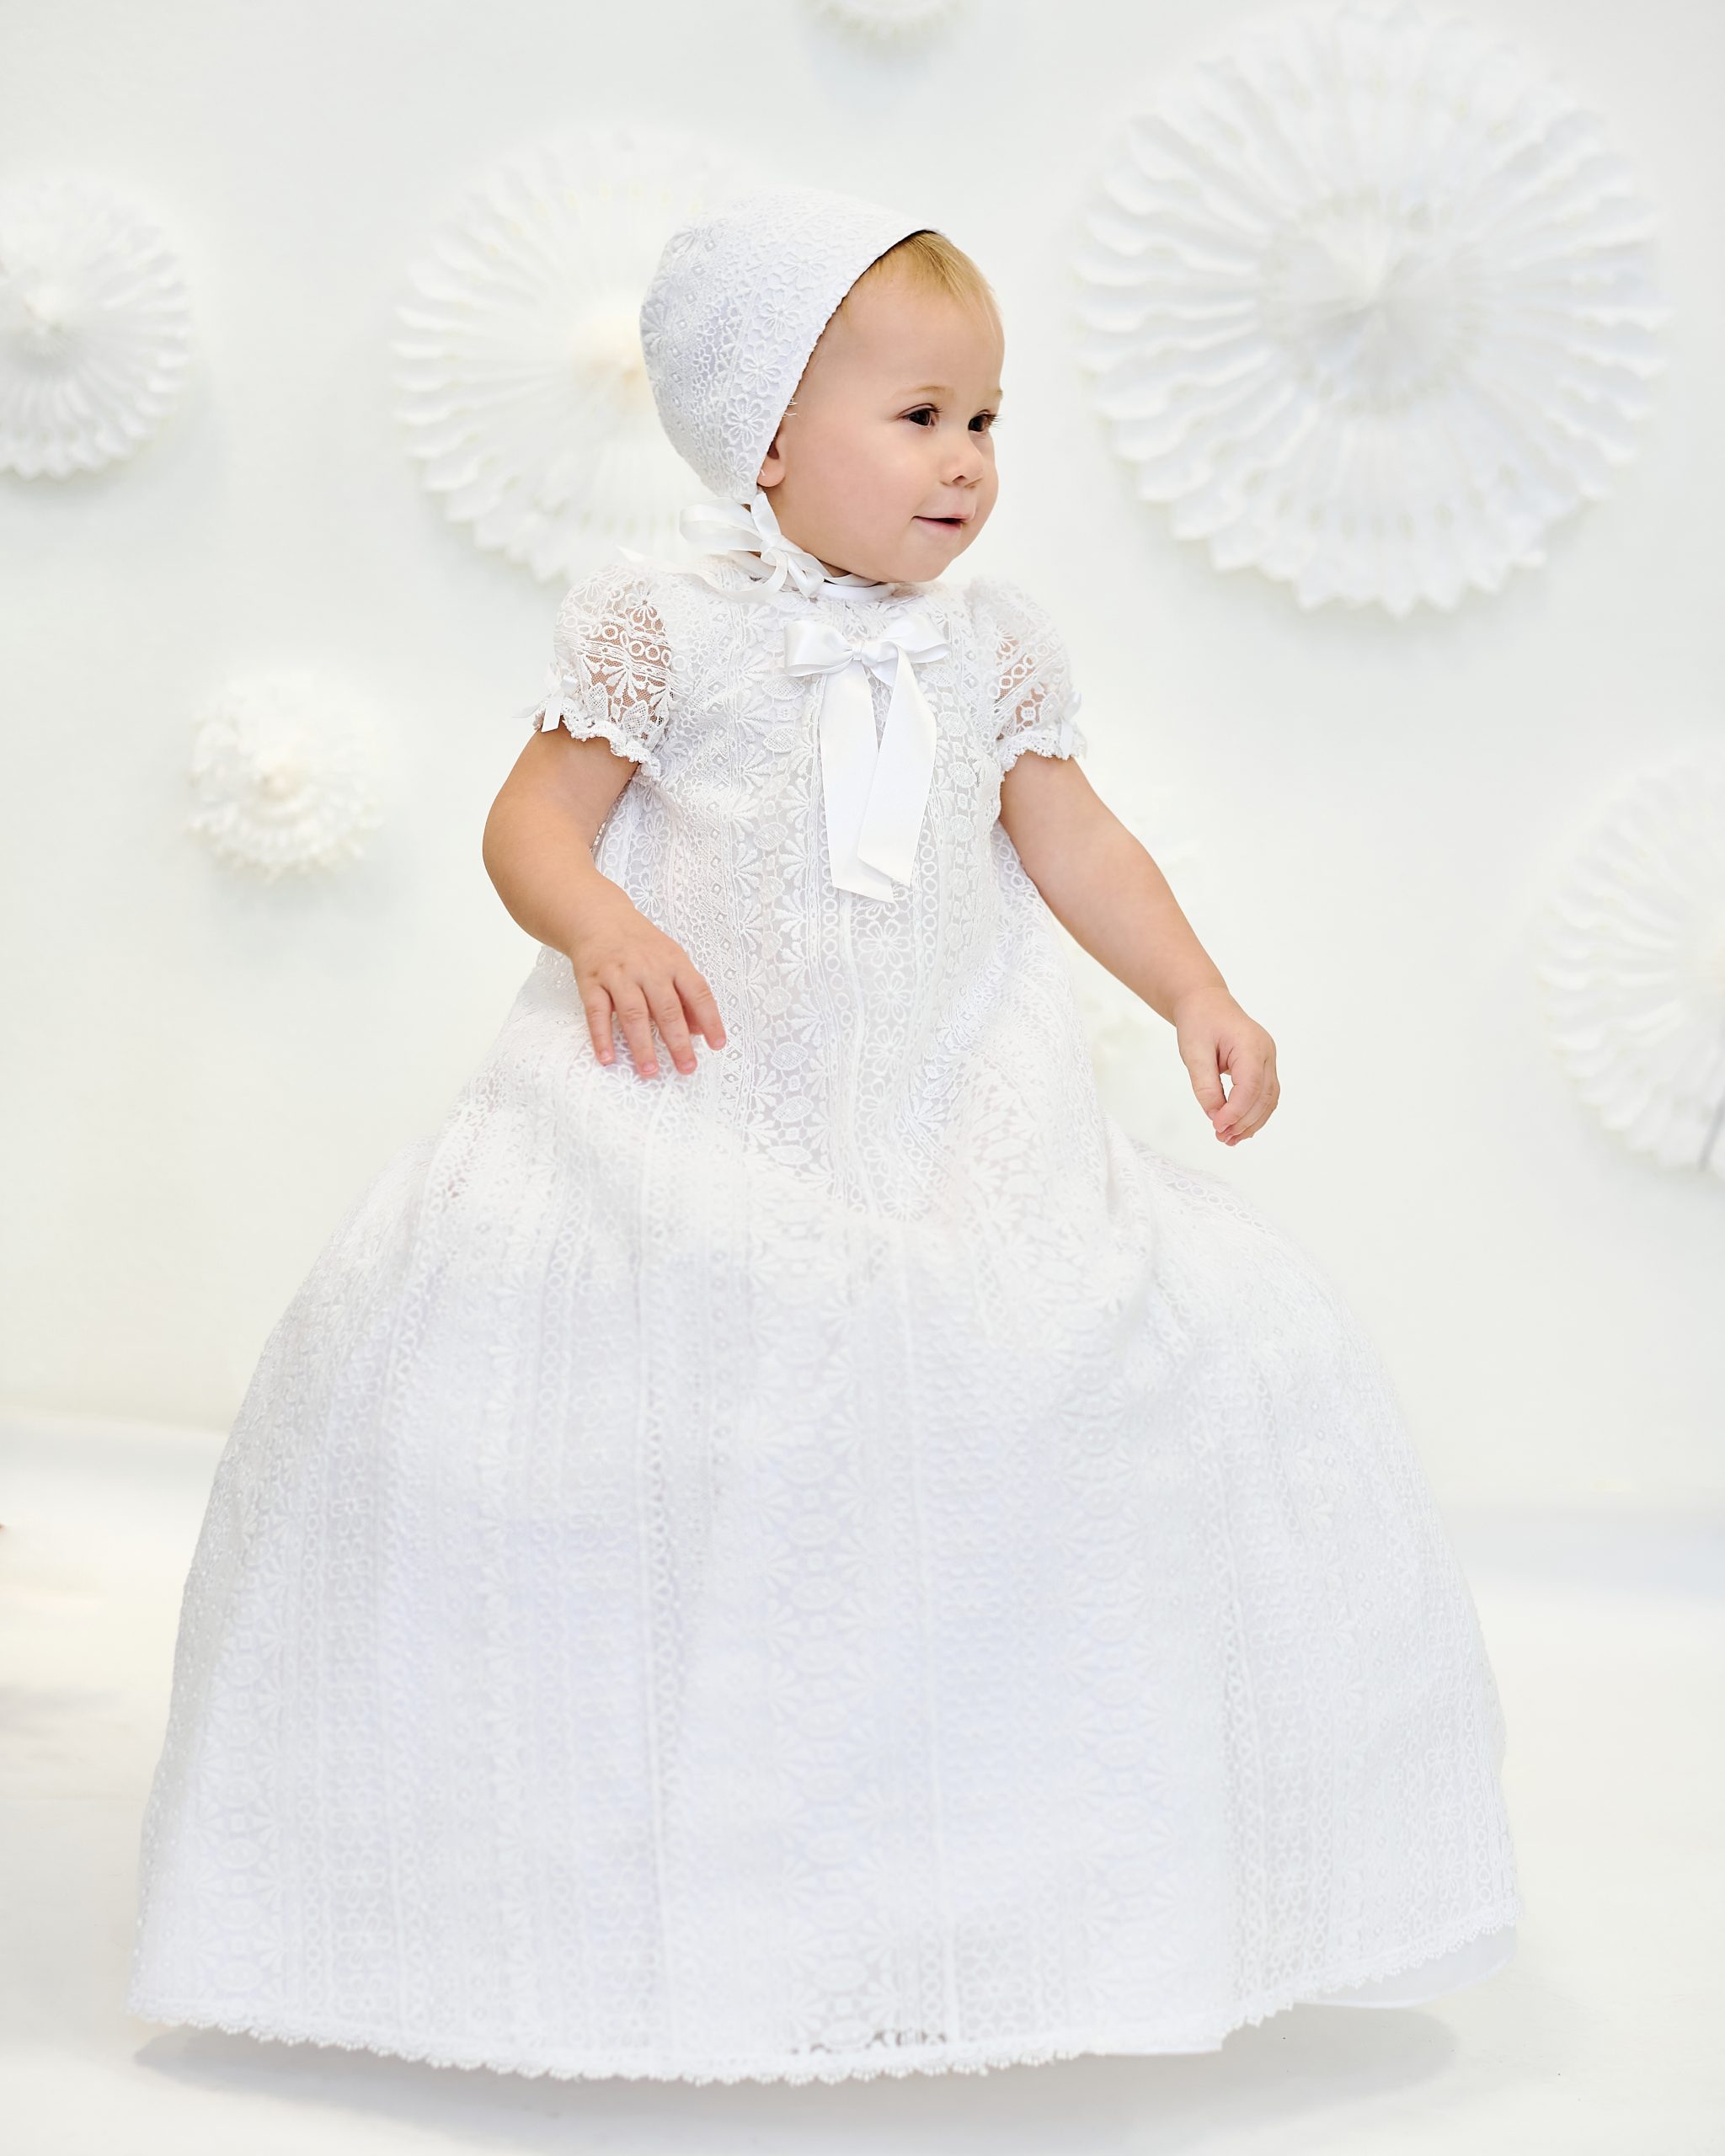 Christening Dress - 070020C | Baby Boutique Clothing